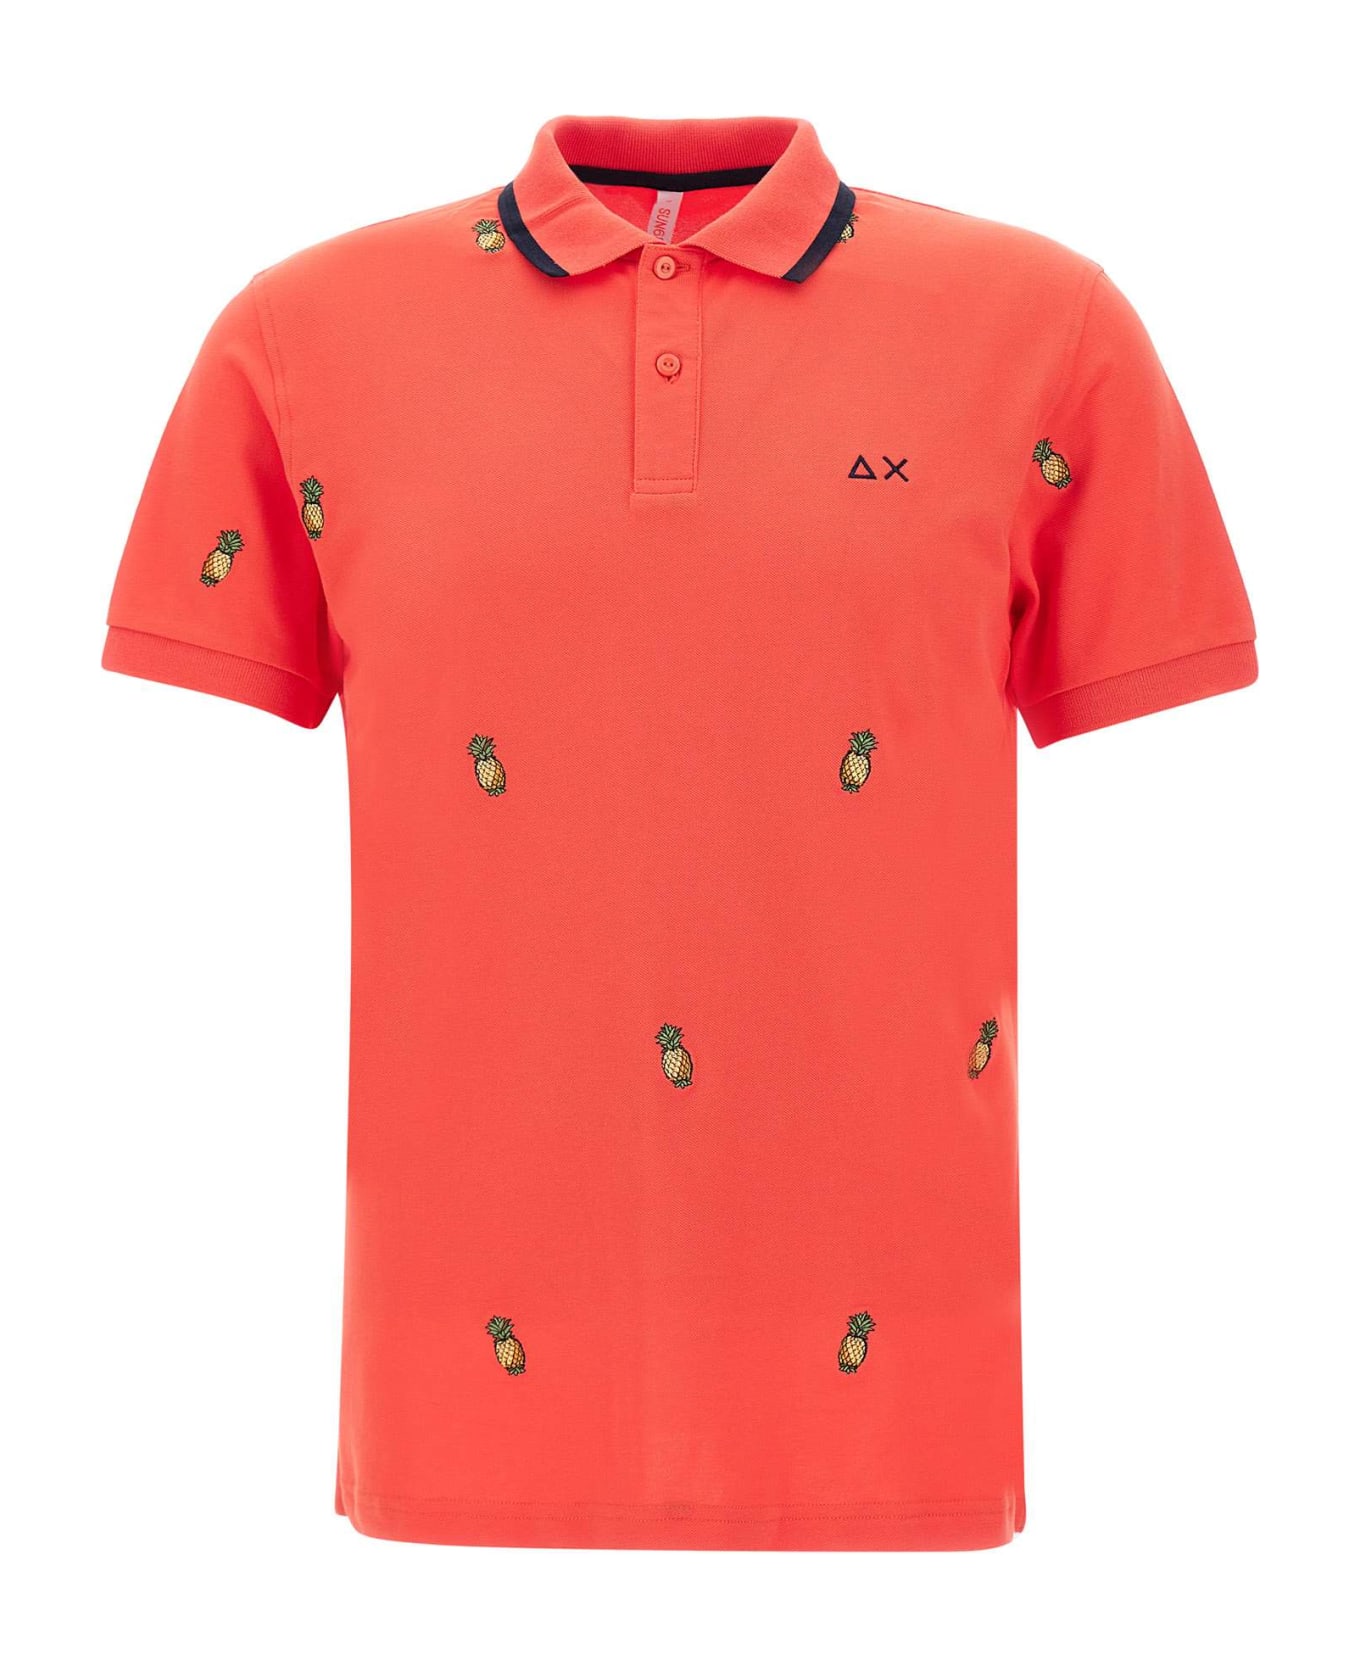 Sun 68 "full Embrodery" Cotton Polo Shirt - RED